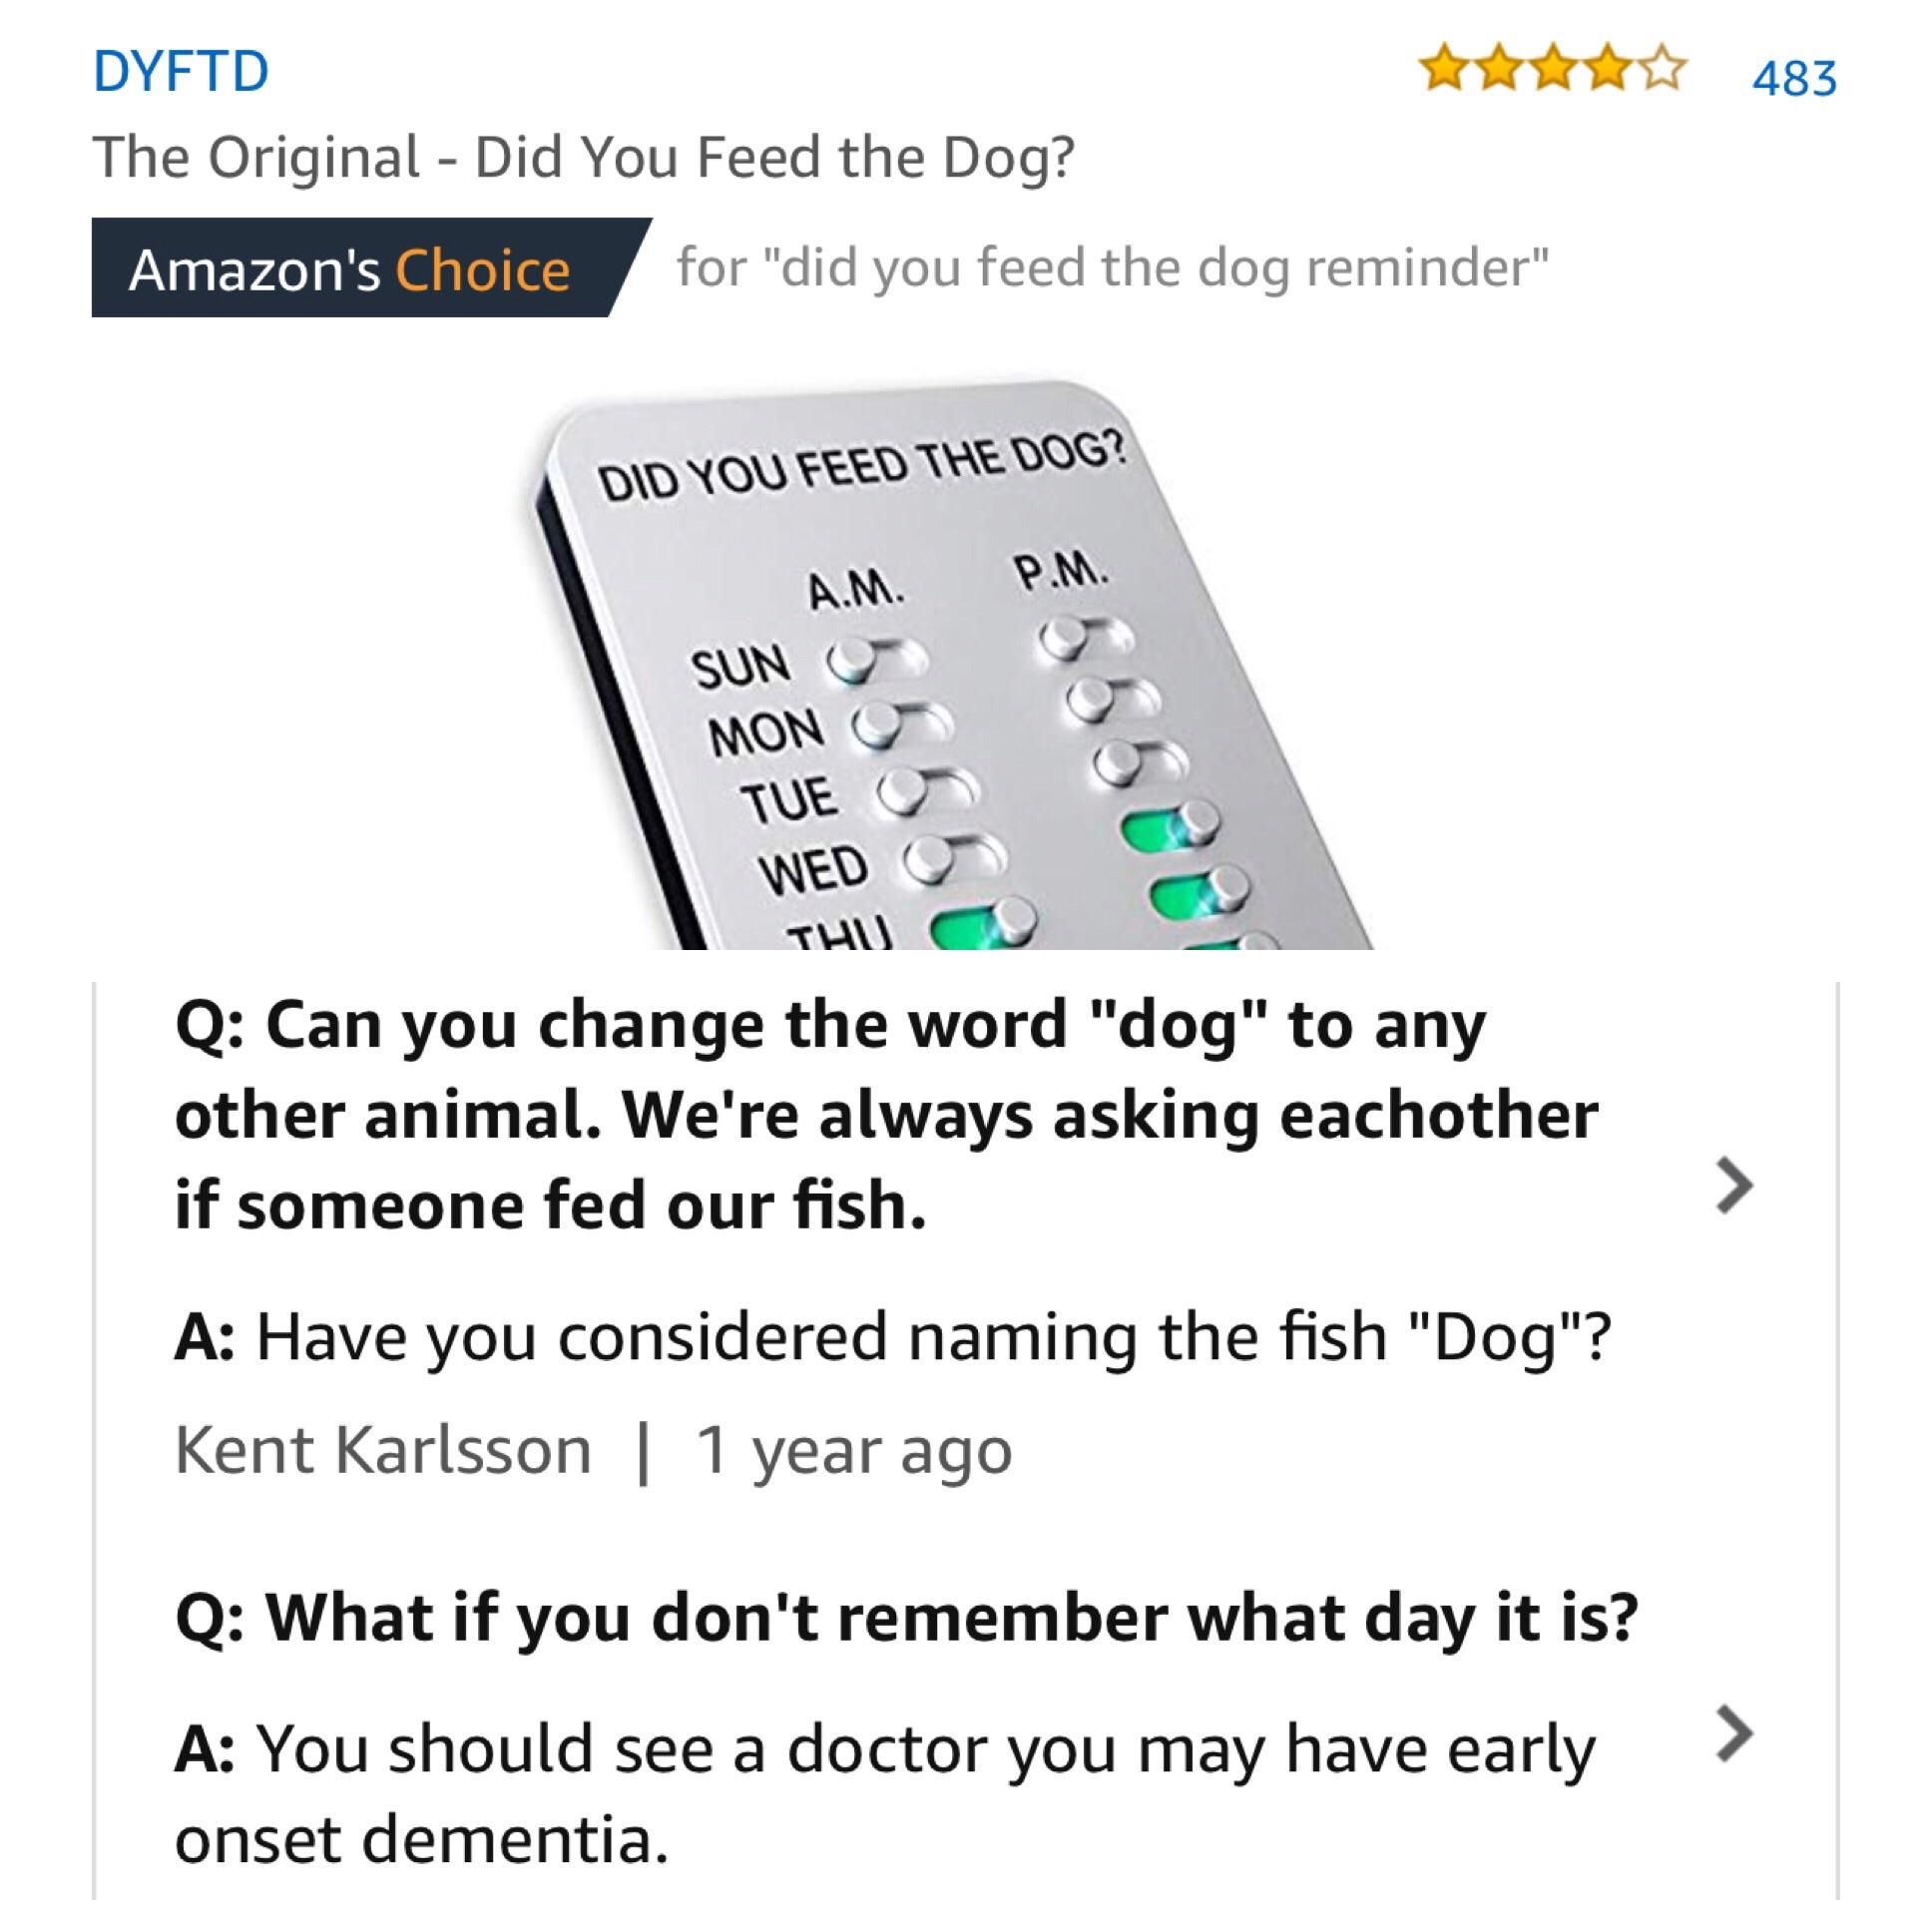 Have you considered naming the fish “Dog?”